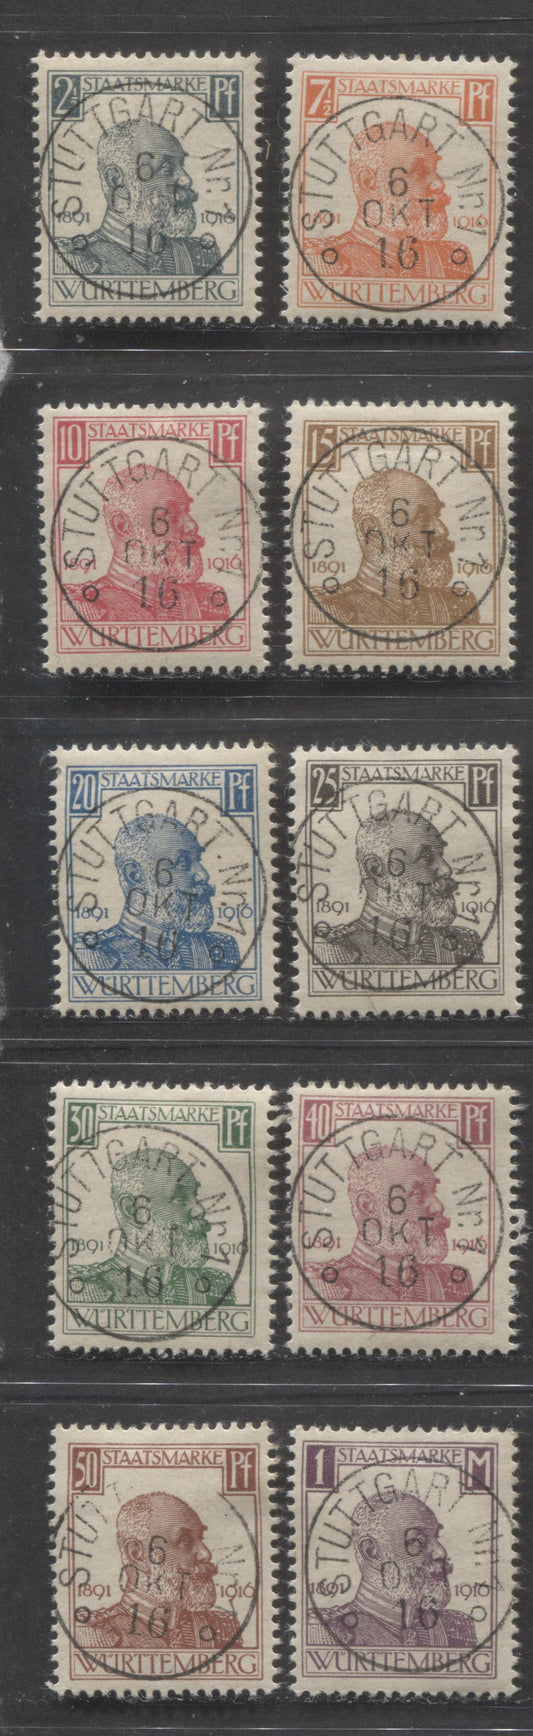 Lot 406 Germany - Wurttenburg SC#O136-O145 1916 King Wilhelm II Official Issue, With Identical SON October 6, 1916 CDS Cancels, 10 VF Used Singles, Click on Listing to See ALL Pictures, Estimated Value $15